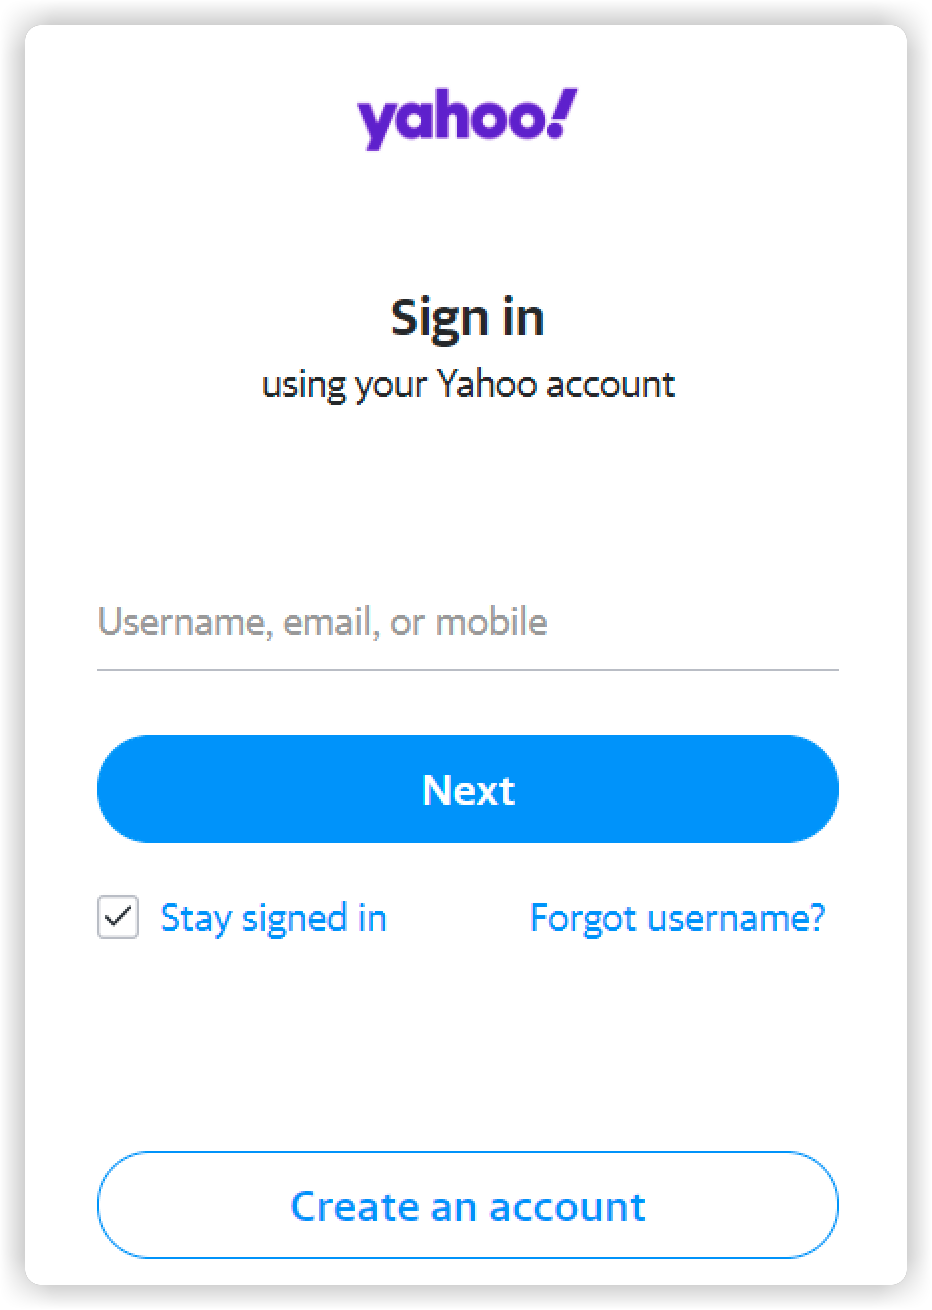 yahoo_sign_in_1_2x.png